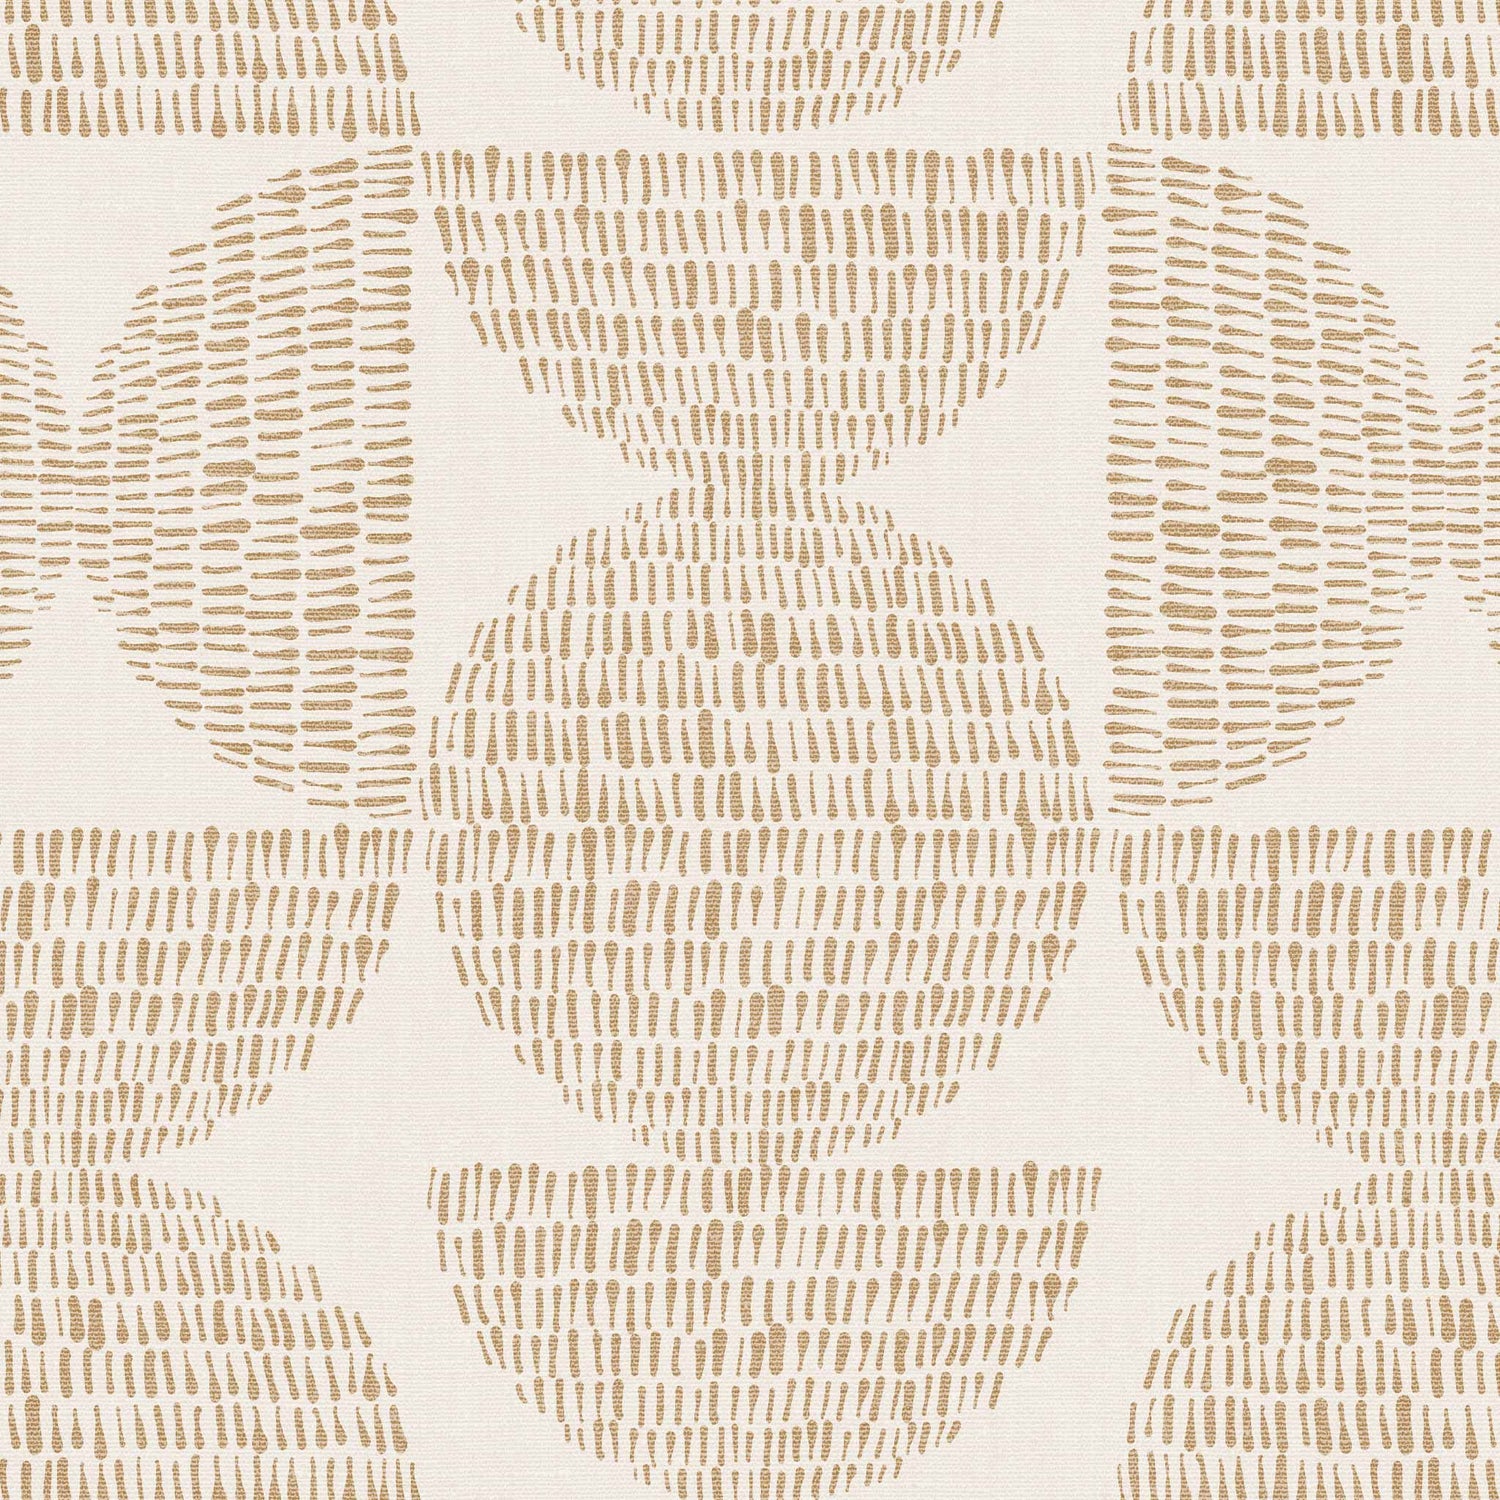 Go crazy with circles! Get yourself these stylish Half Circle Blocks Wallpapers for a unique wall decor solution. With its beige-on-cream design, these geometric wallpapers will easily liven up any room, making it look modern and chic. Circle up and add a bit of life to your walls!